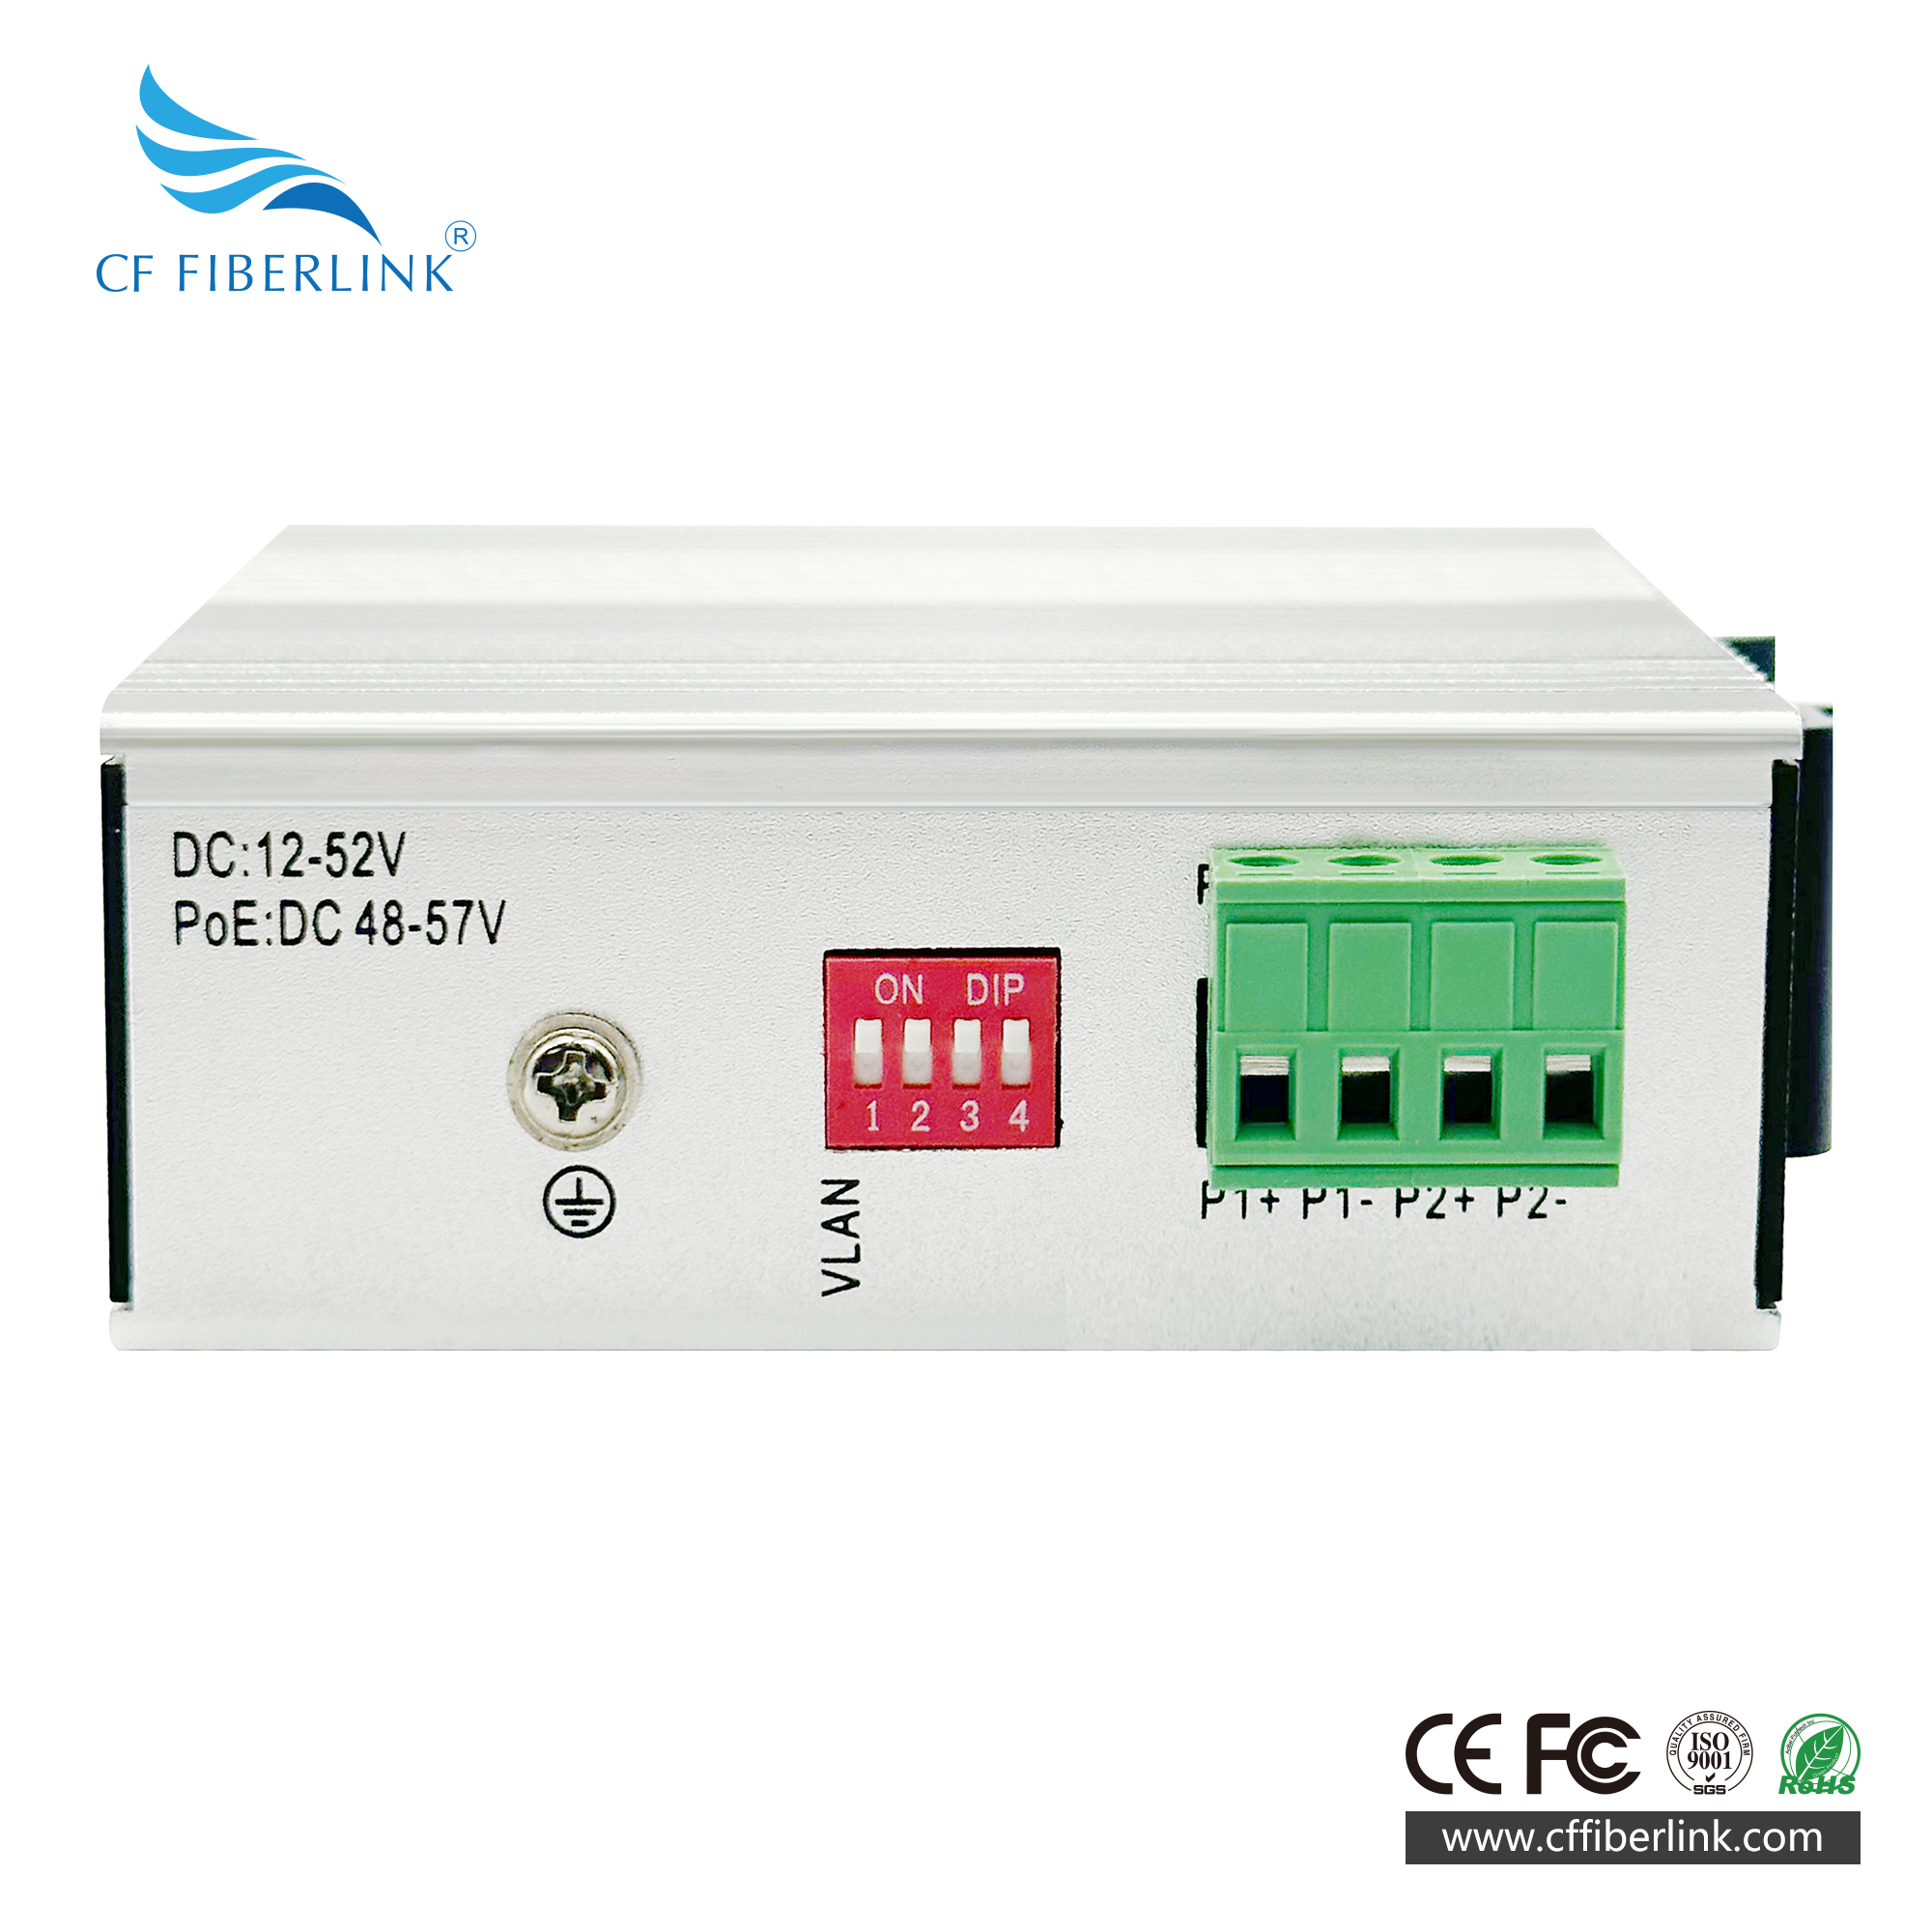 2-port 10/100M Industrial Ethernet Switch